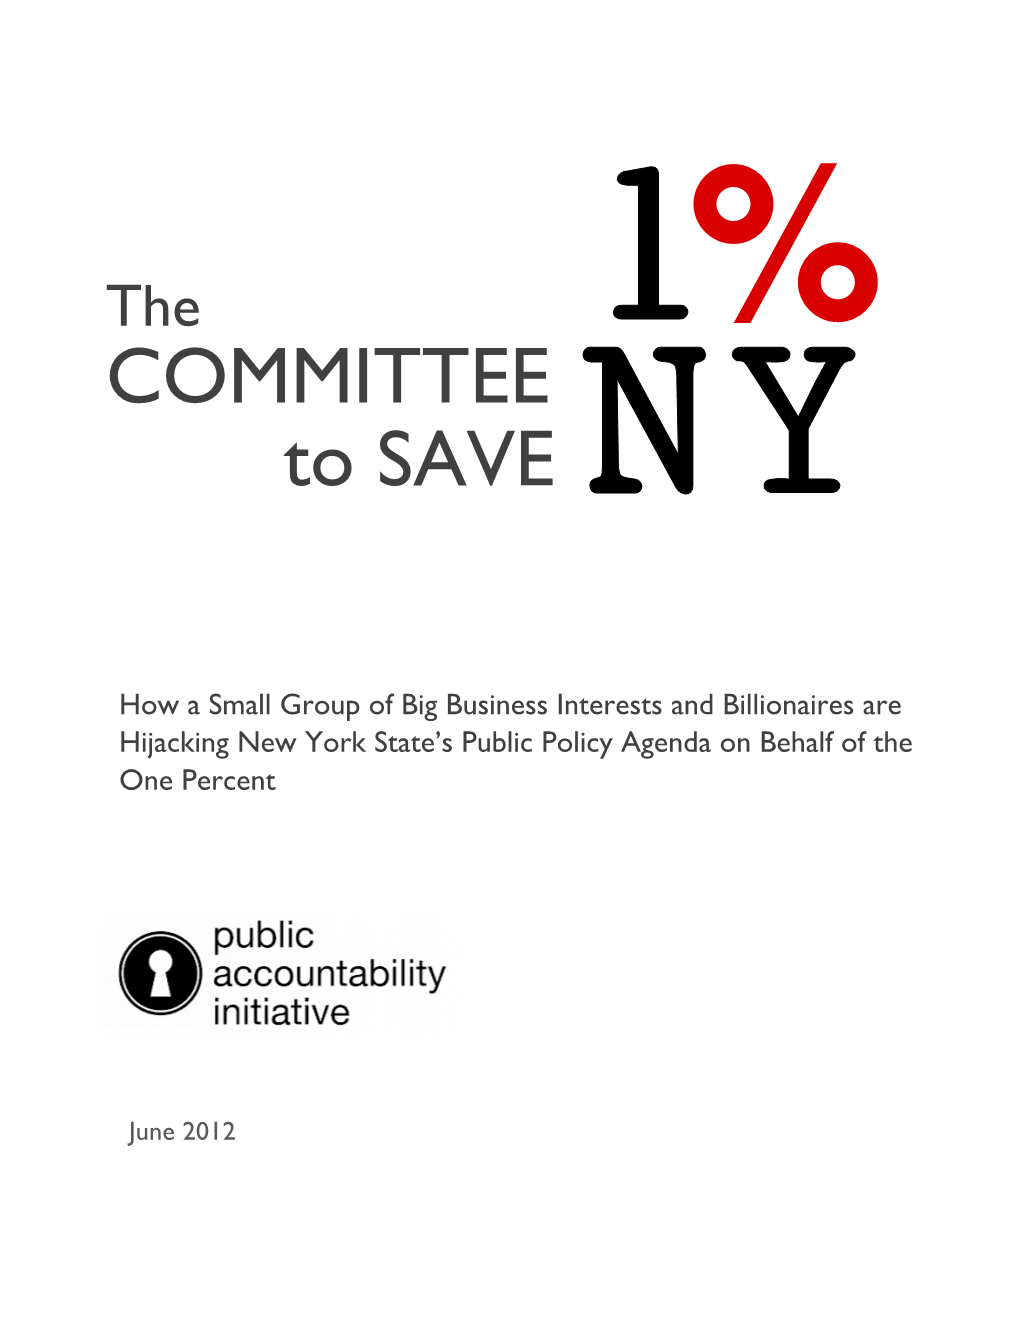 COMMITTEE to SAVE NY